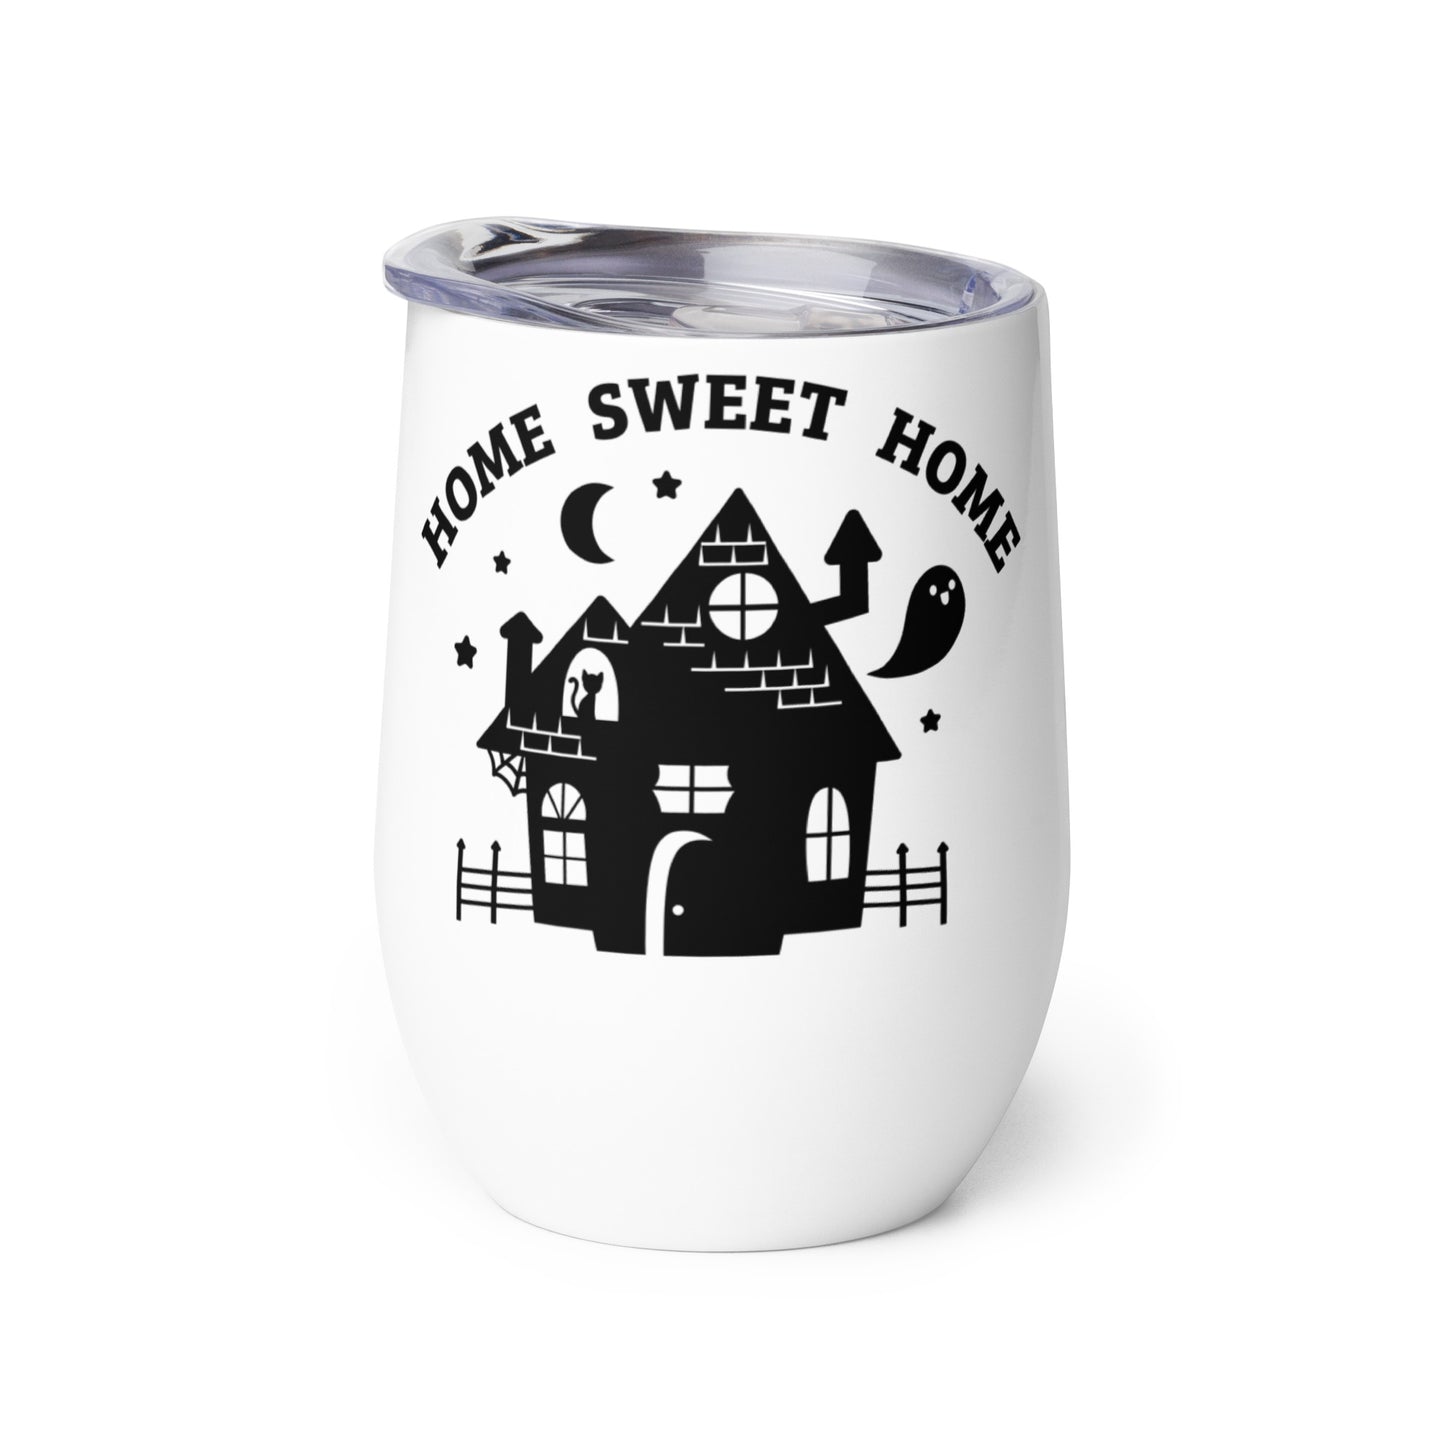 A white metal wine tumbler with a plastic lid. An illustration of a black silhouette of a haunted house decorates the tumbler. Text above the house reads "Home Sweet Home".